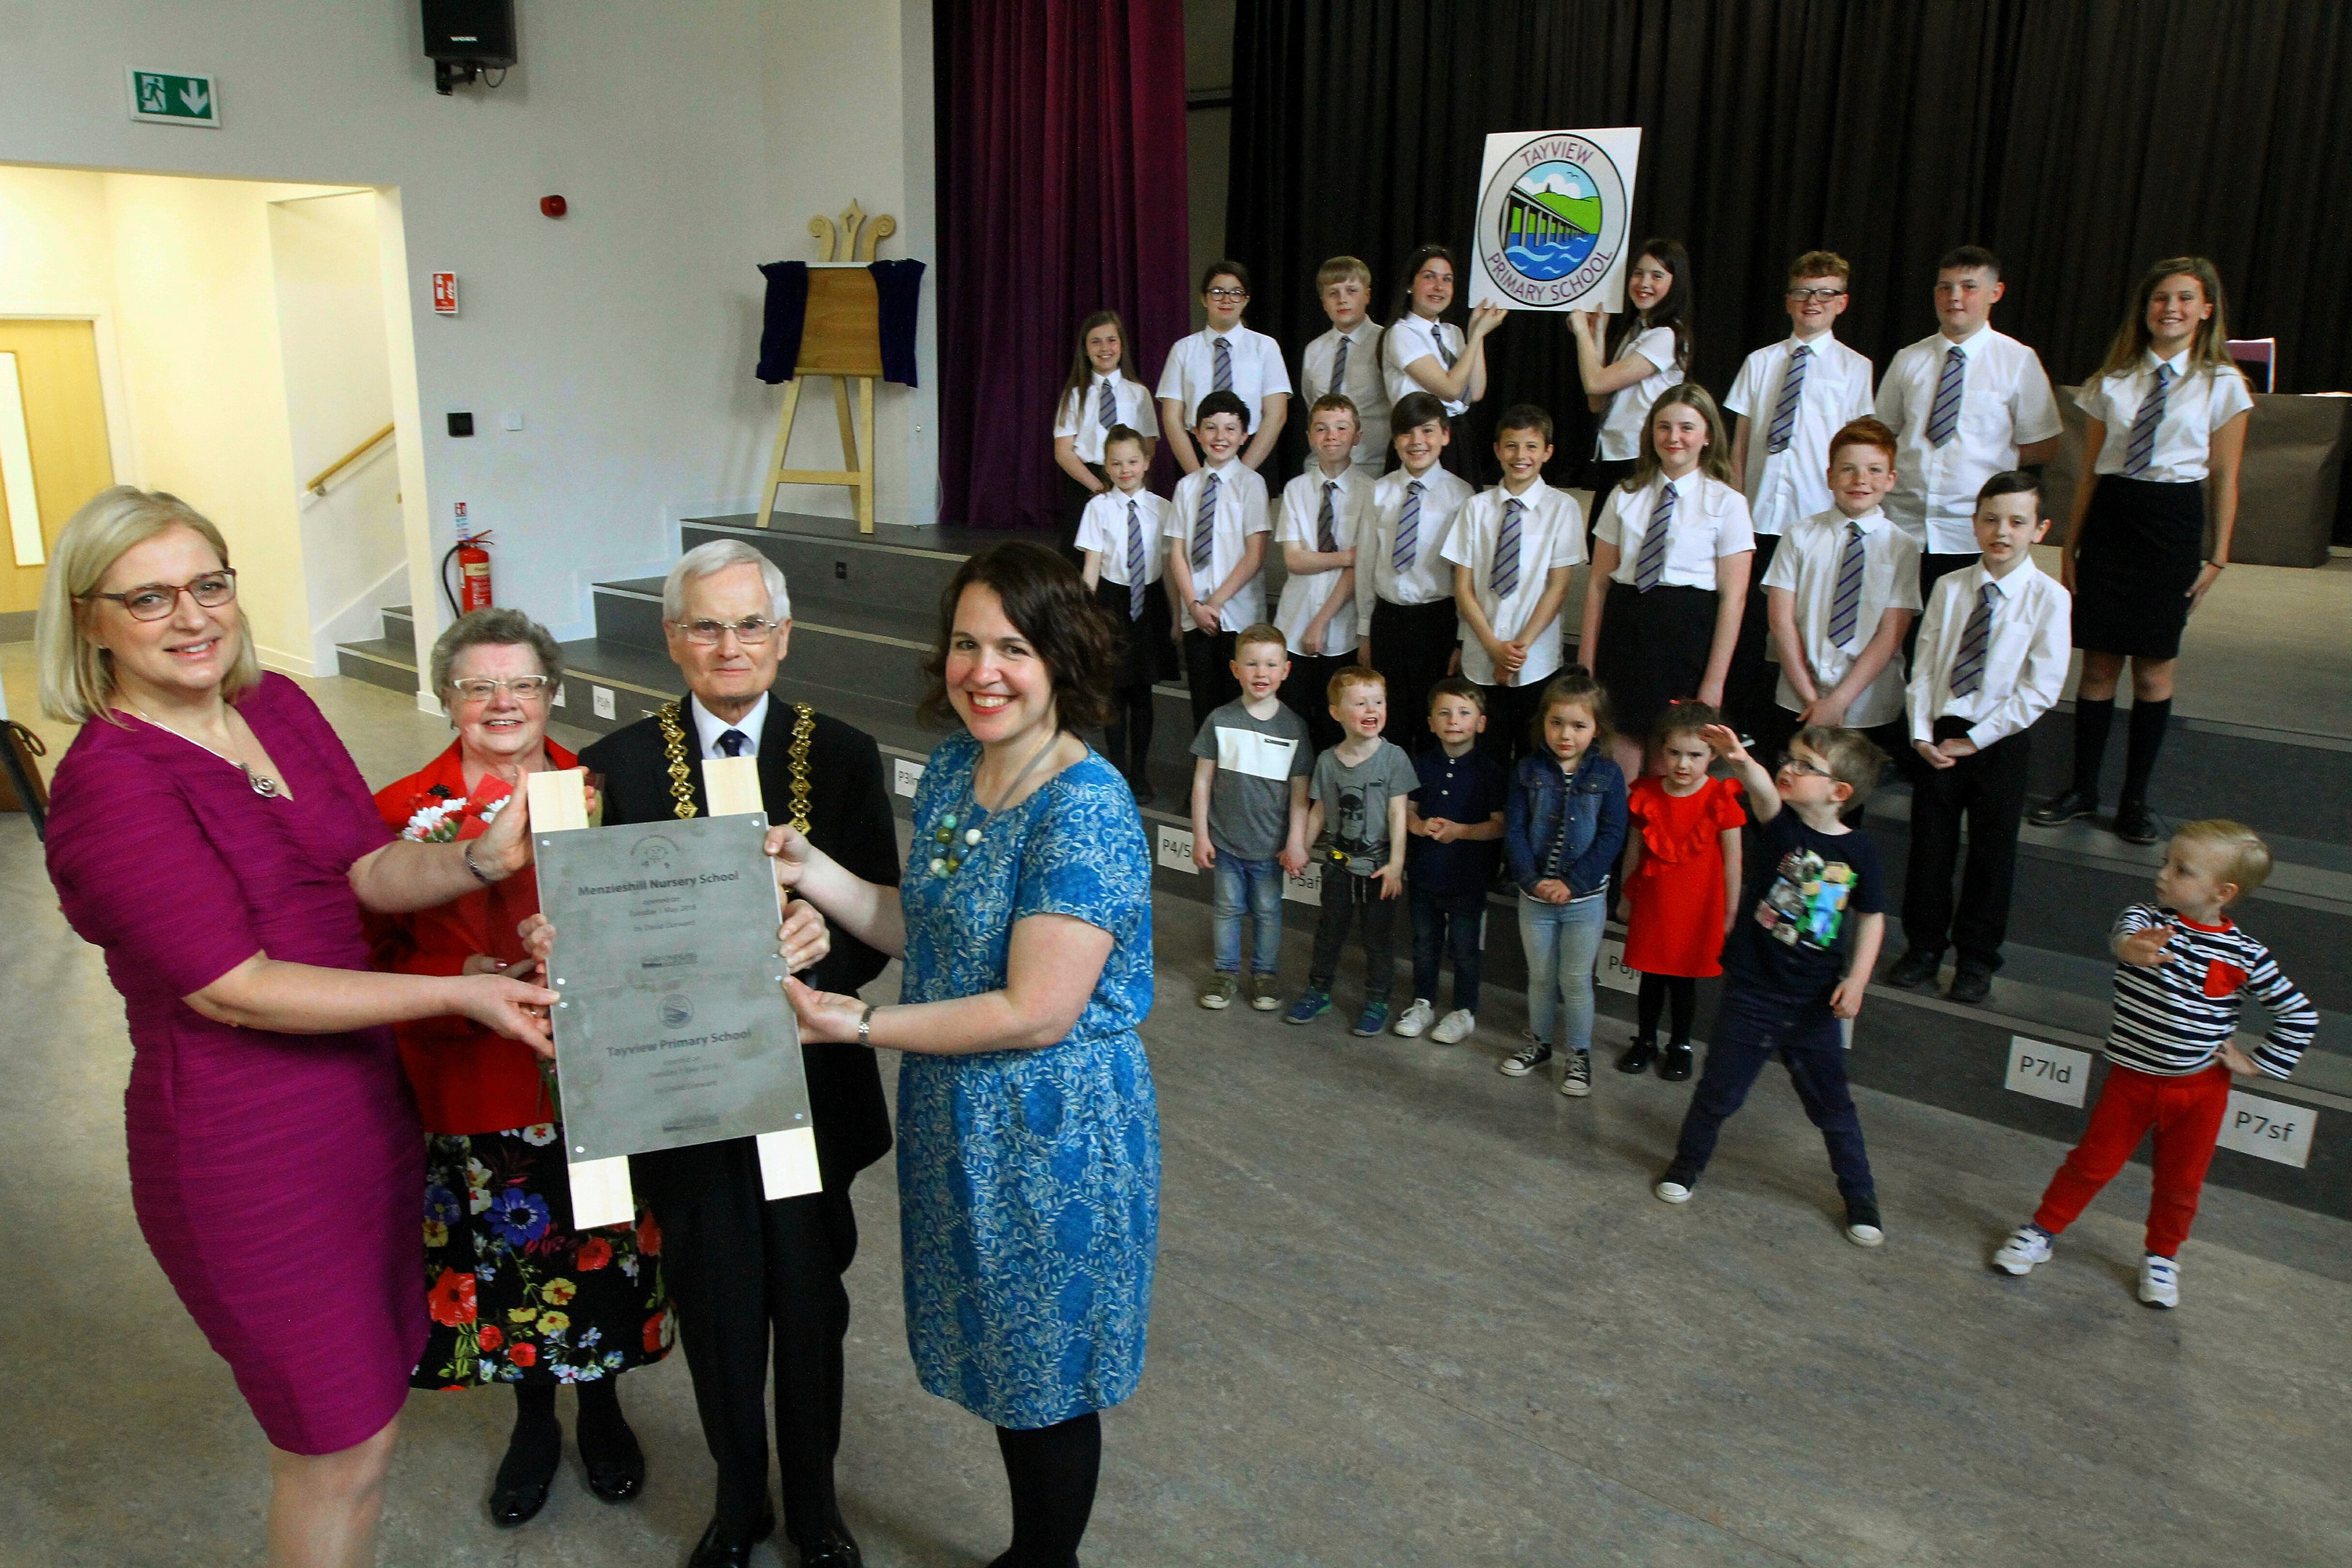 Lord Provost Ian Borthwick and Lady Provost Linda Borthwick, with Dawn Archibald, left, Head Teacher of Tayview Primary School and Carol Blair, right, Head Teacher of Tayview Nursery at the opening of the school and nursery school in Menzieshill today, with some of the primary six and seven pupils and nursery youngsters from the nursery in the background..